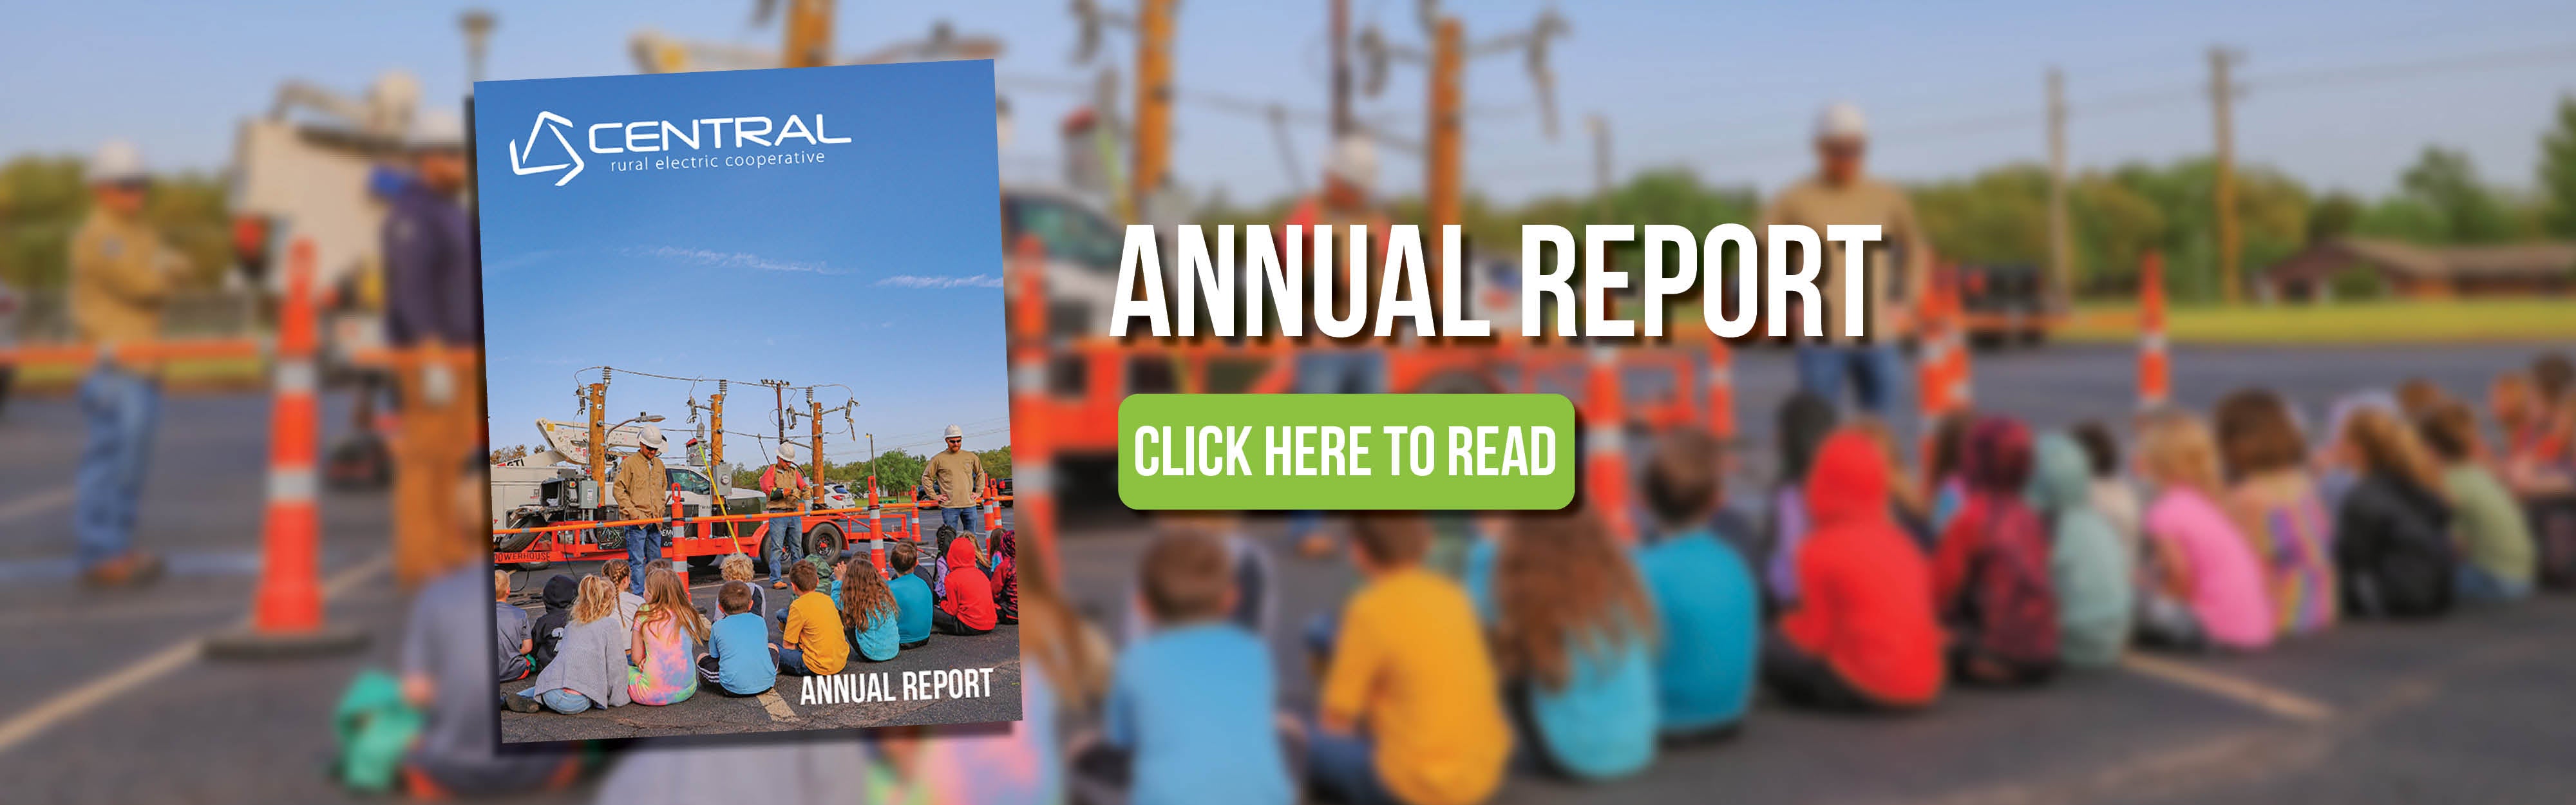 Central's annual report click to read more